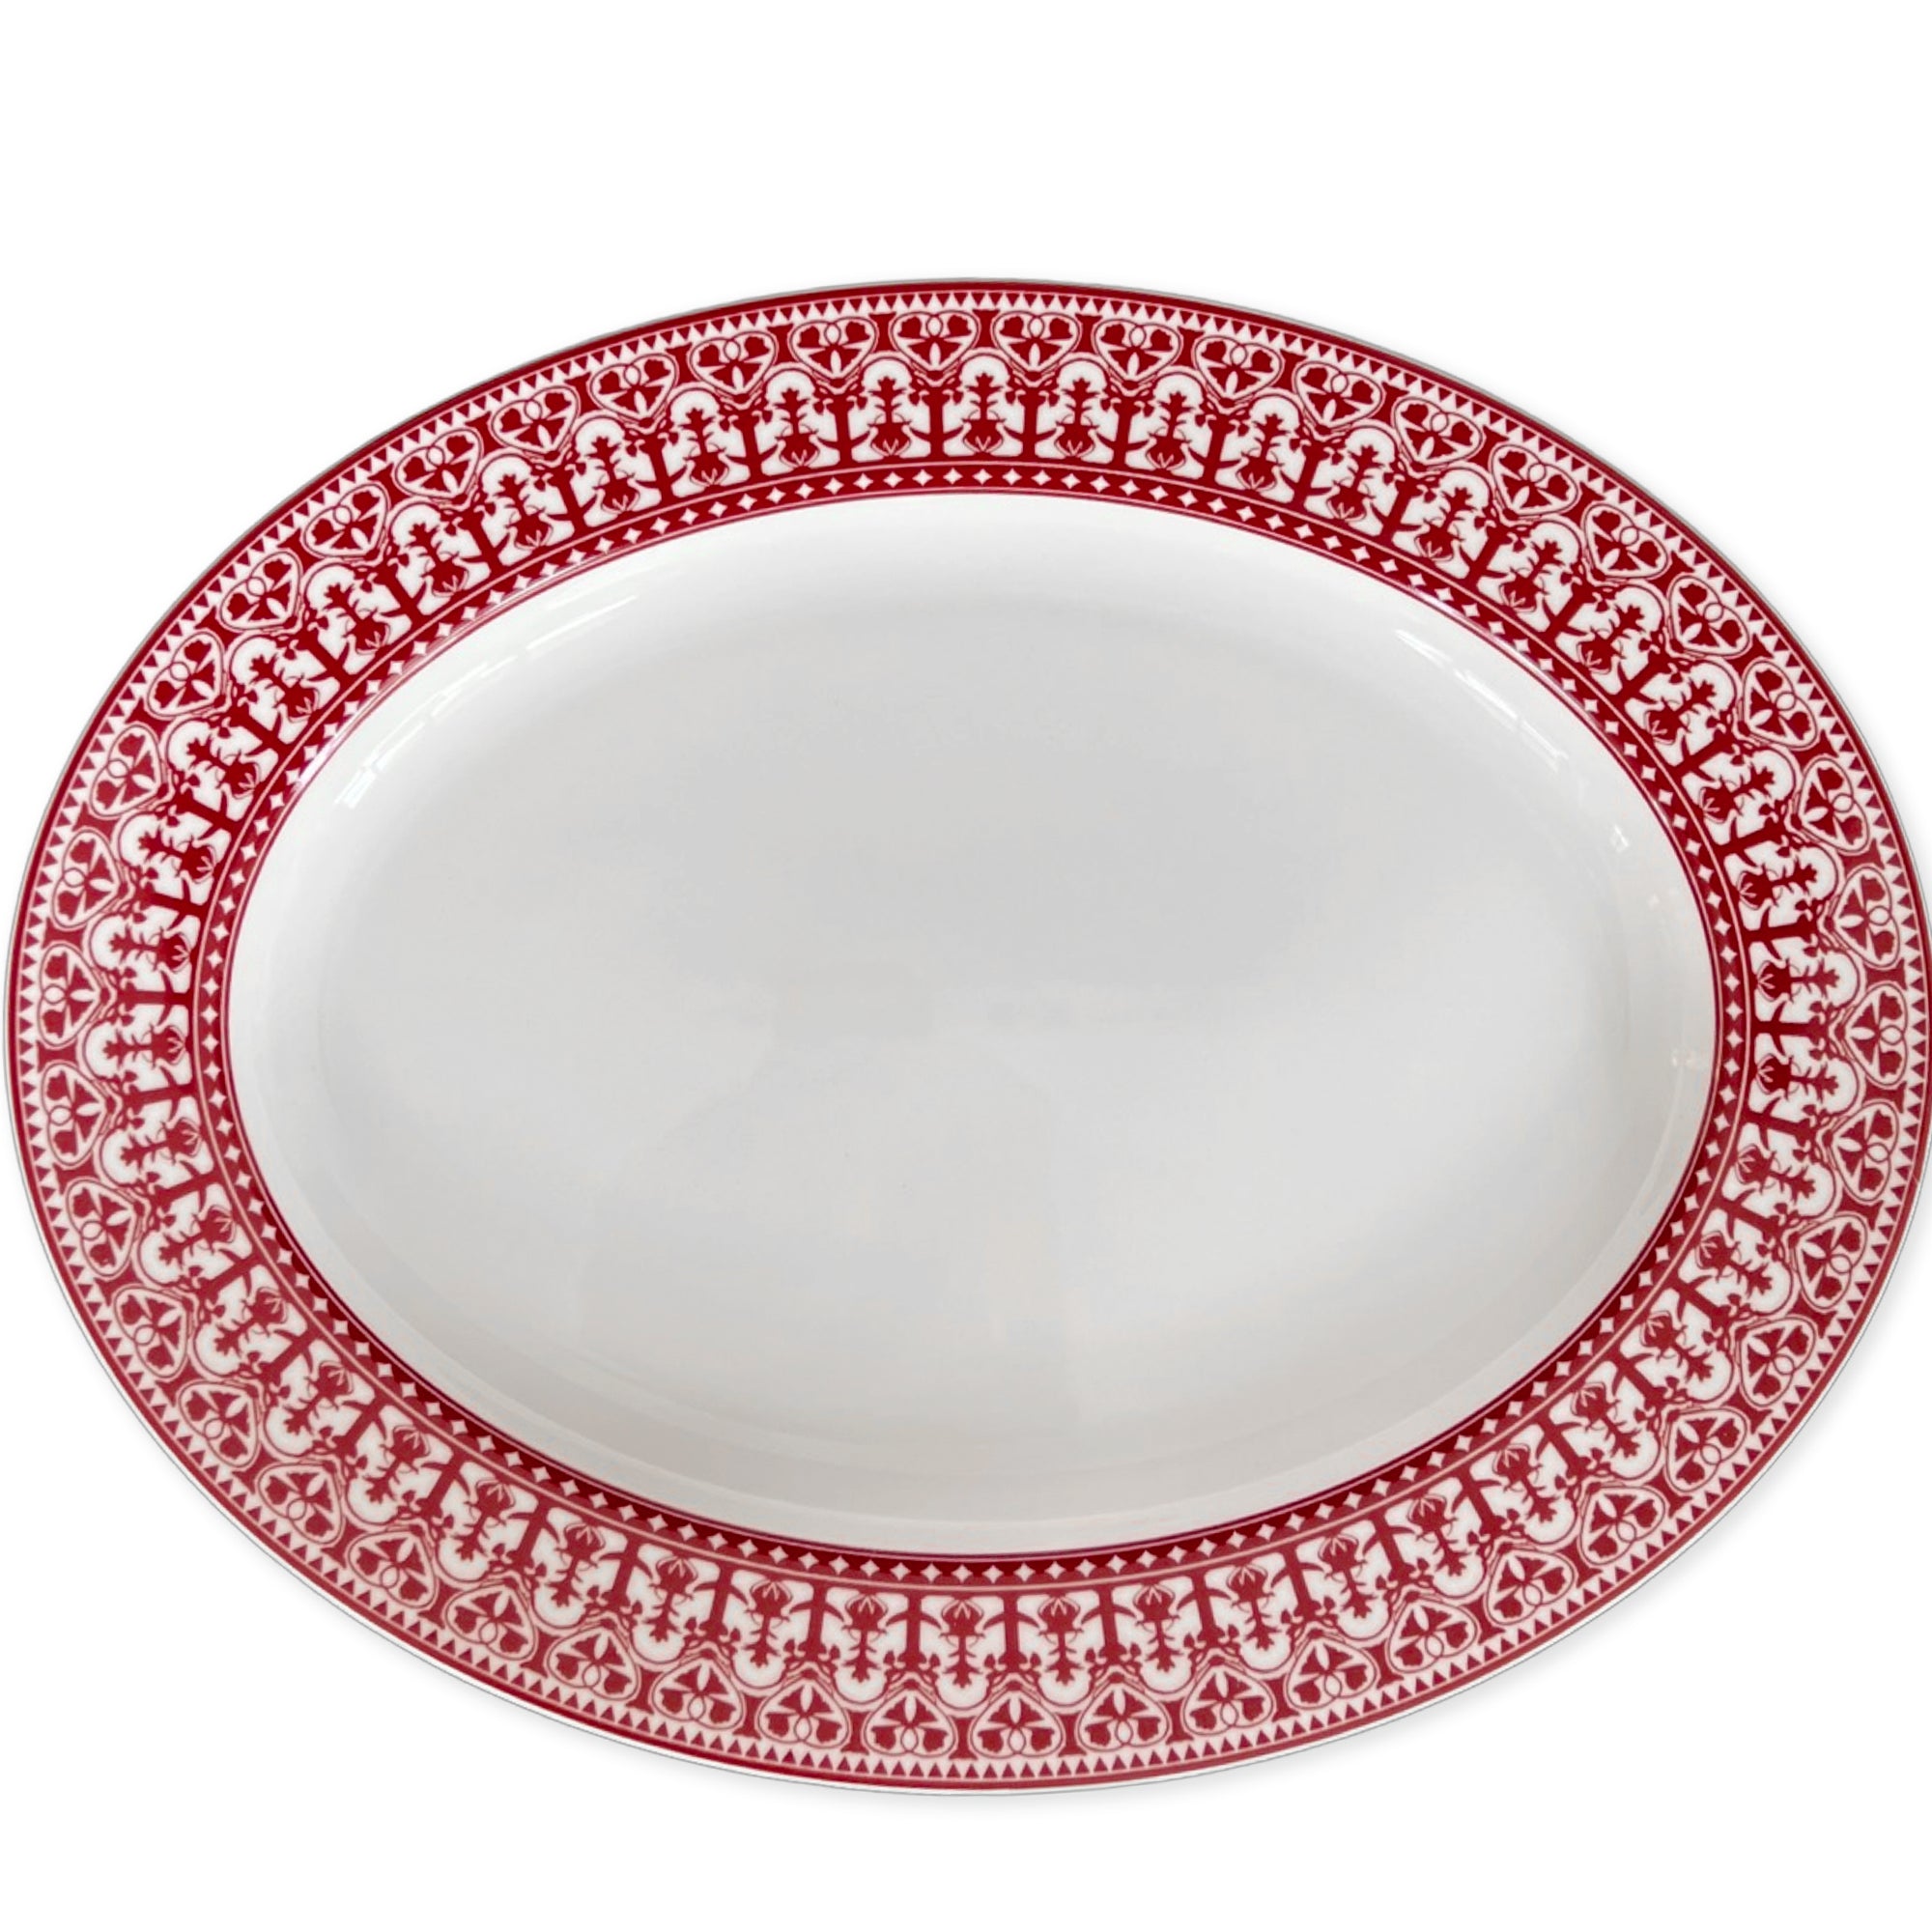 Casablanca crimson large oval platter in red and white, high-fired porcelainffrom Caskata